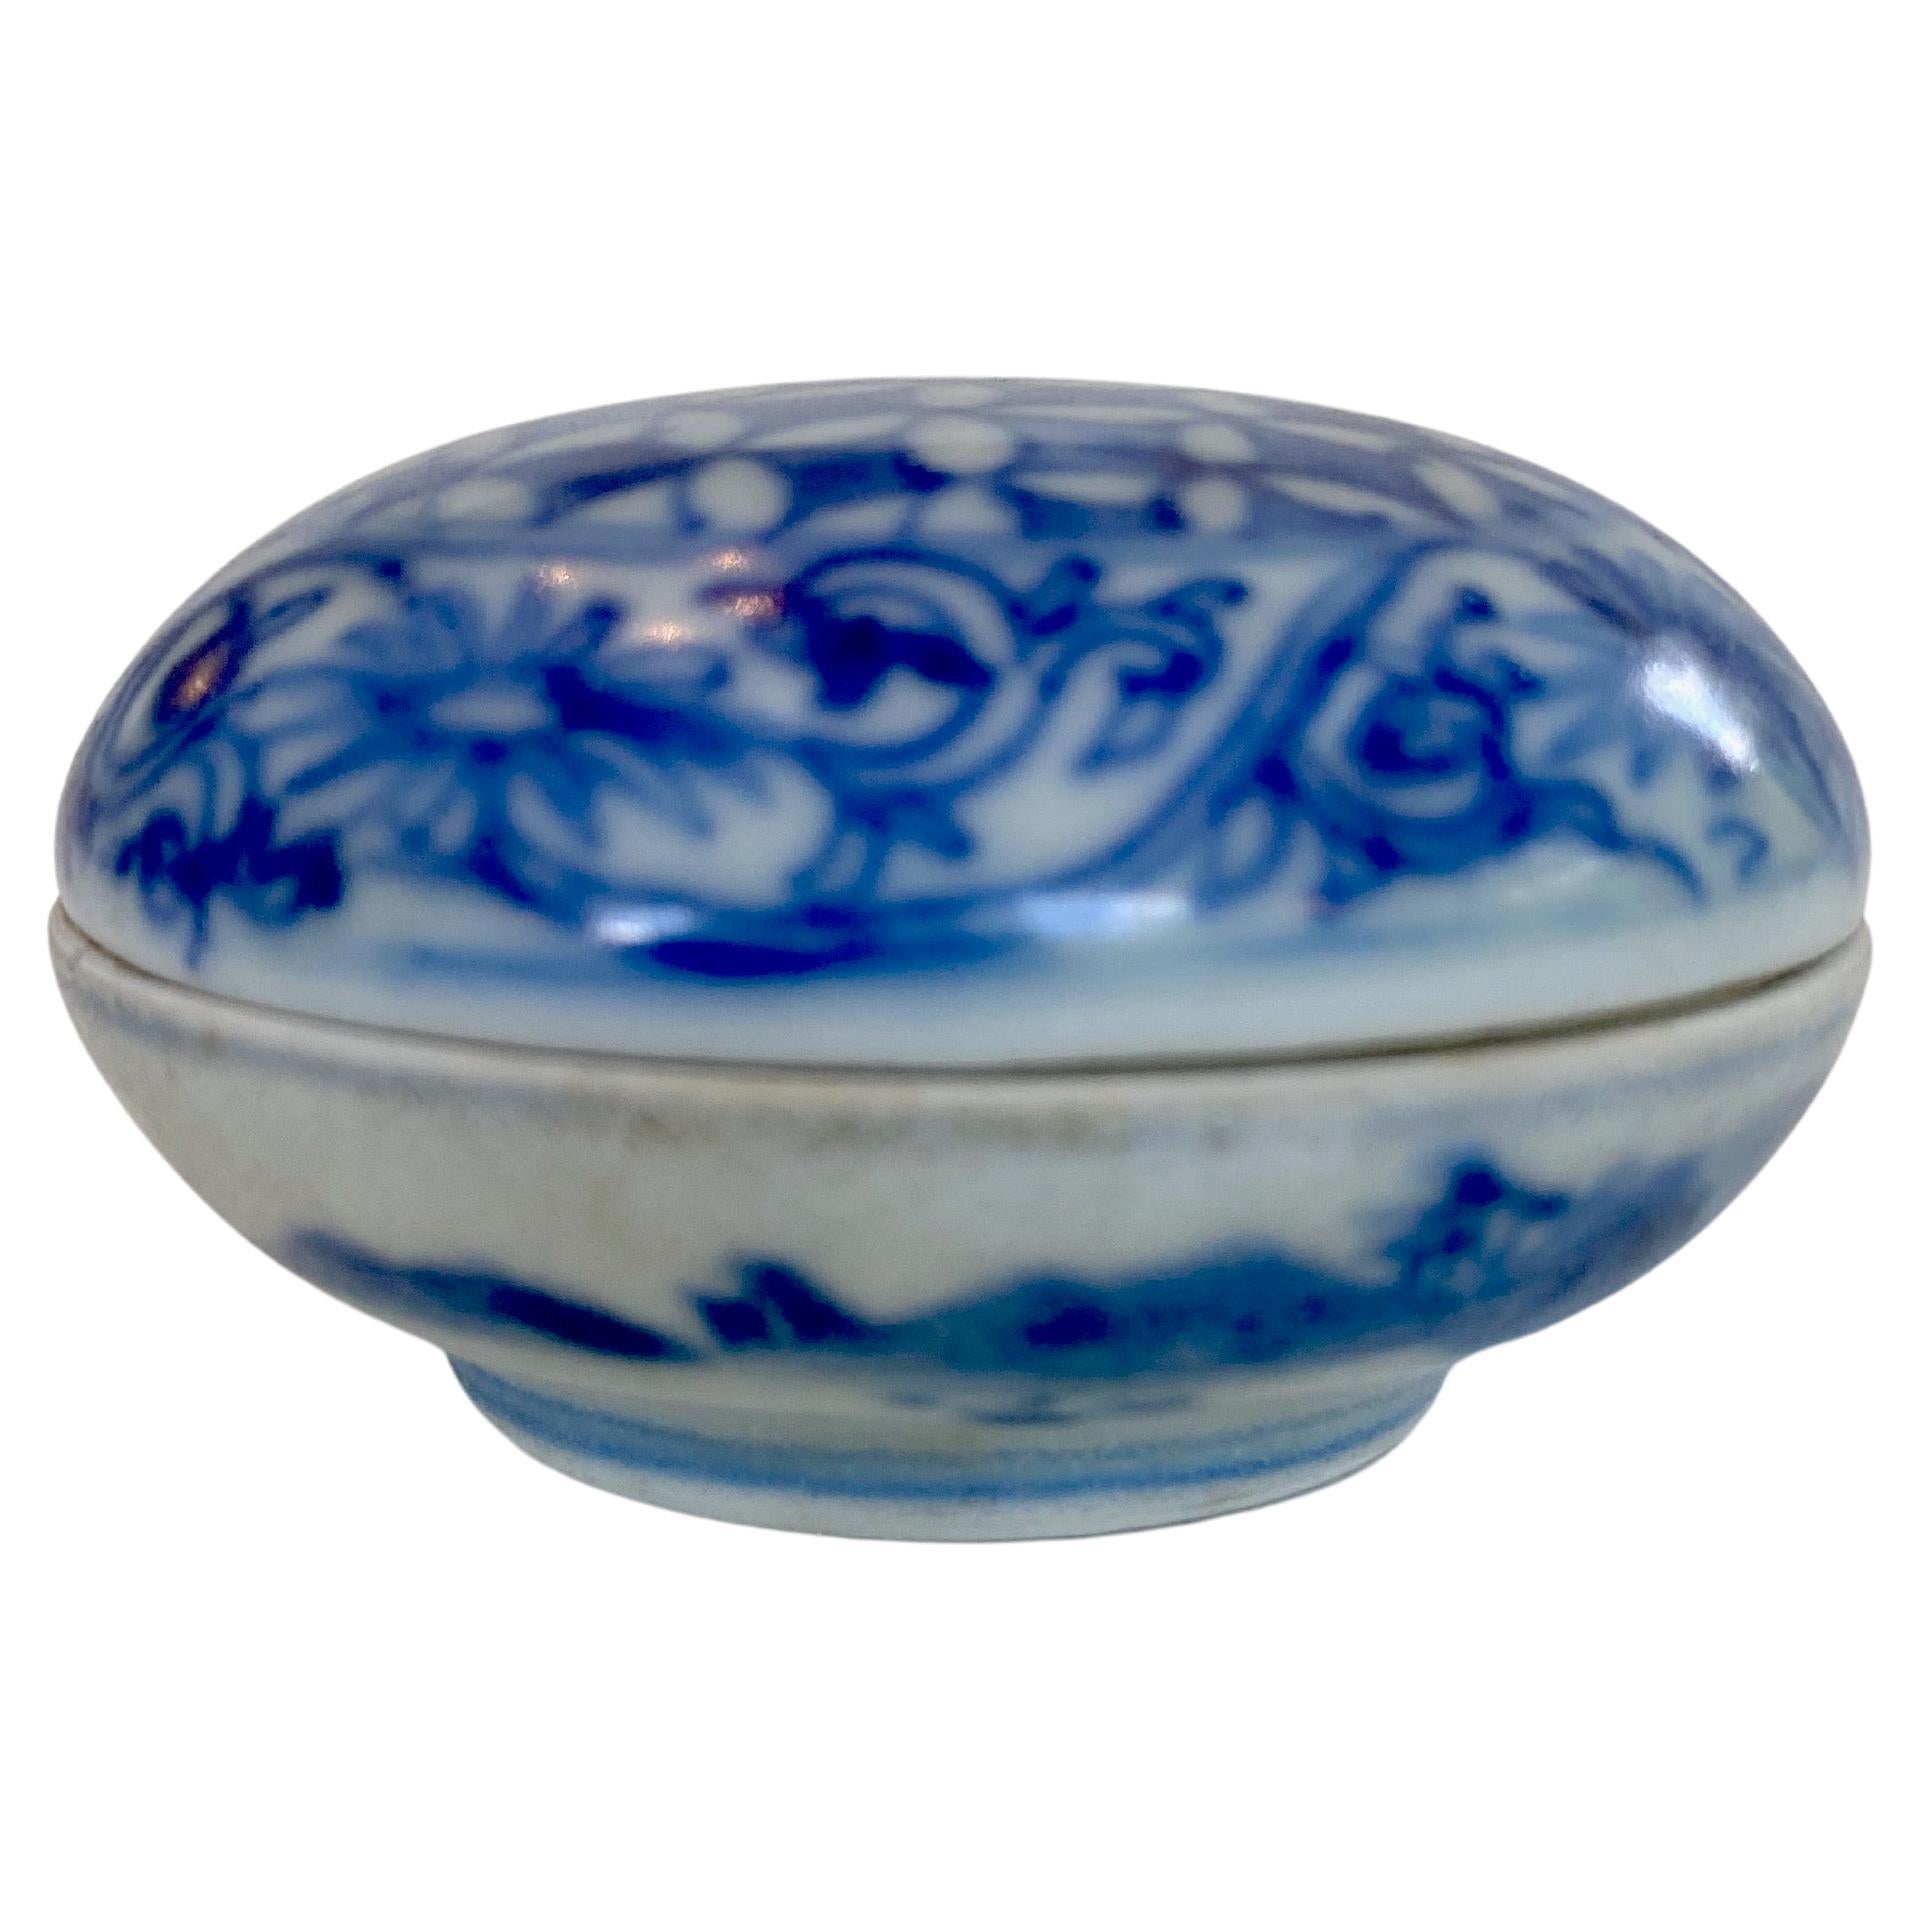 Chinese Blue and White Porcelain Box from the Hatcher Collection (Item C)